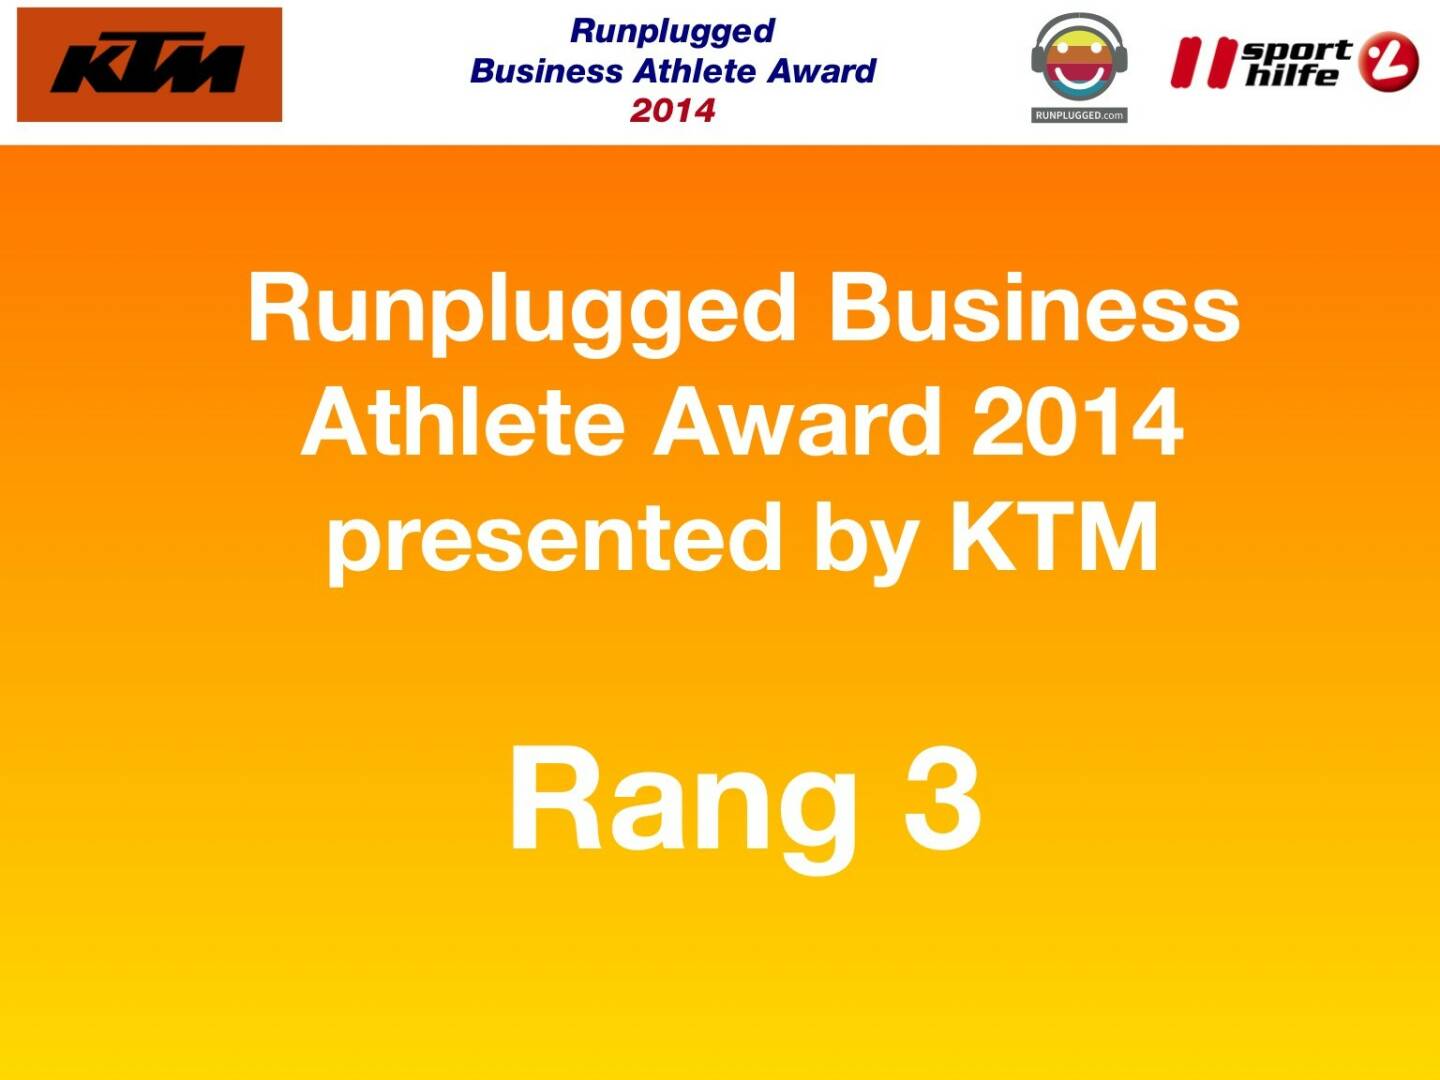 Runplugged Business Athlete Award 2014 presented by KTM Rang 3